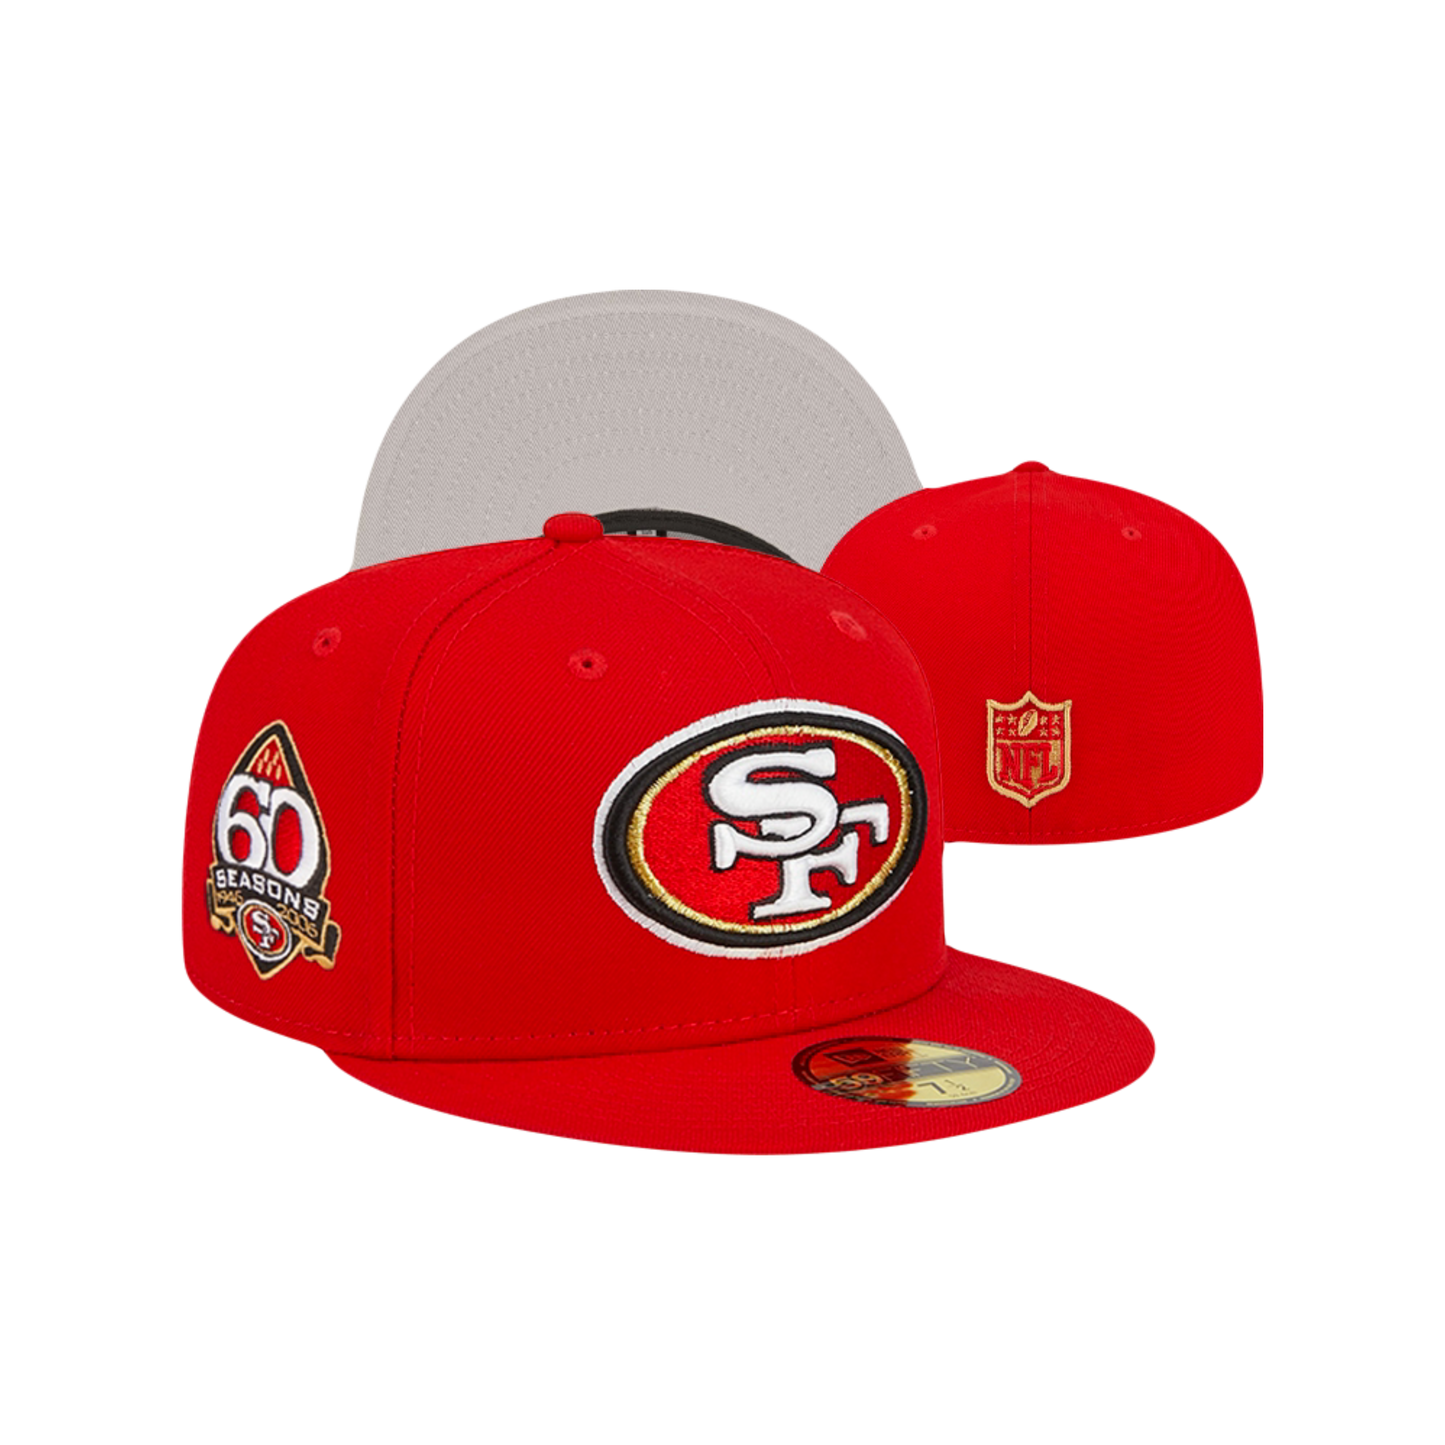 San Francisco 49ers New Era NFL ‘60th Season’ Red Fitted Hat